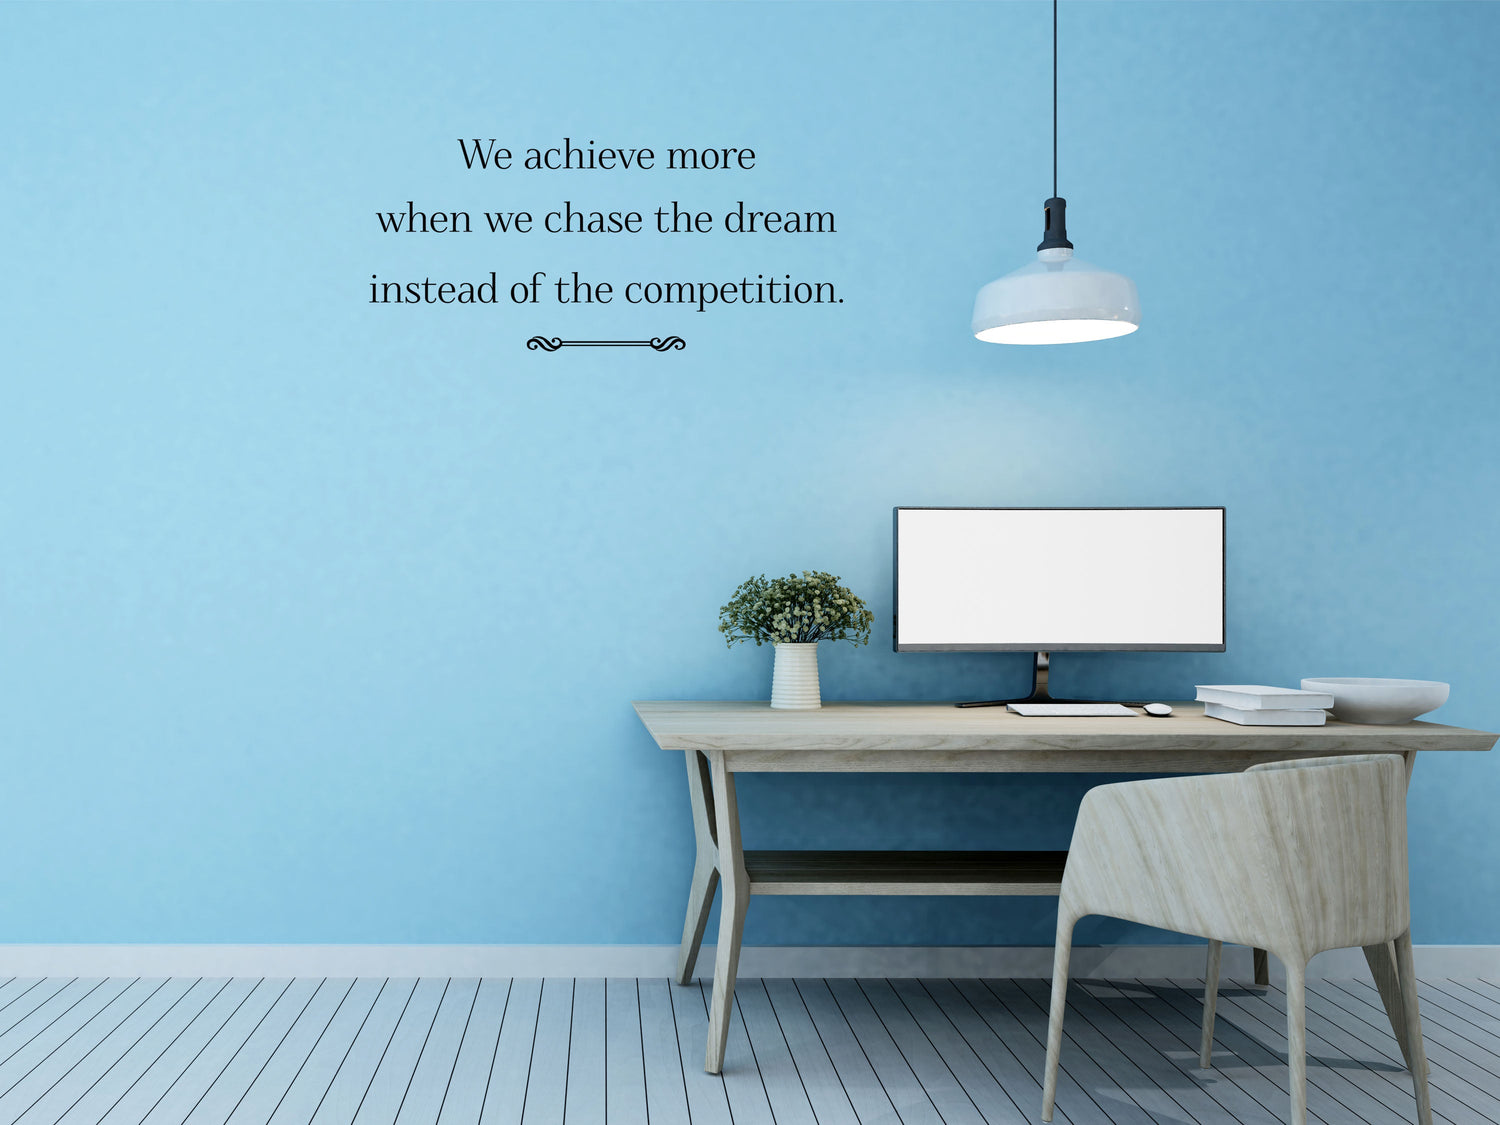 We Achieve More When We Chase The Dream - Inspirational Wall Decals Vinyl Wall Decal Inspirational Wall Signs 